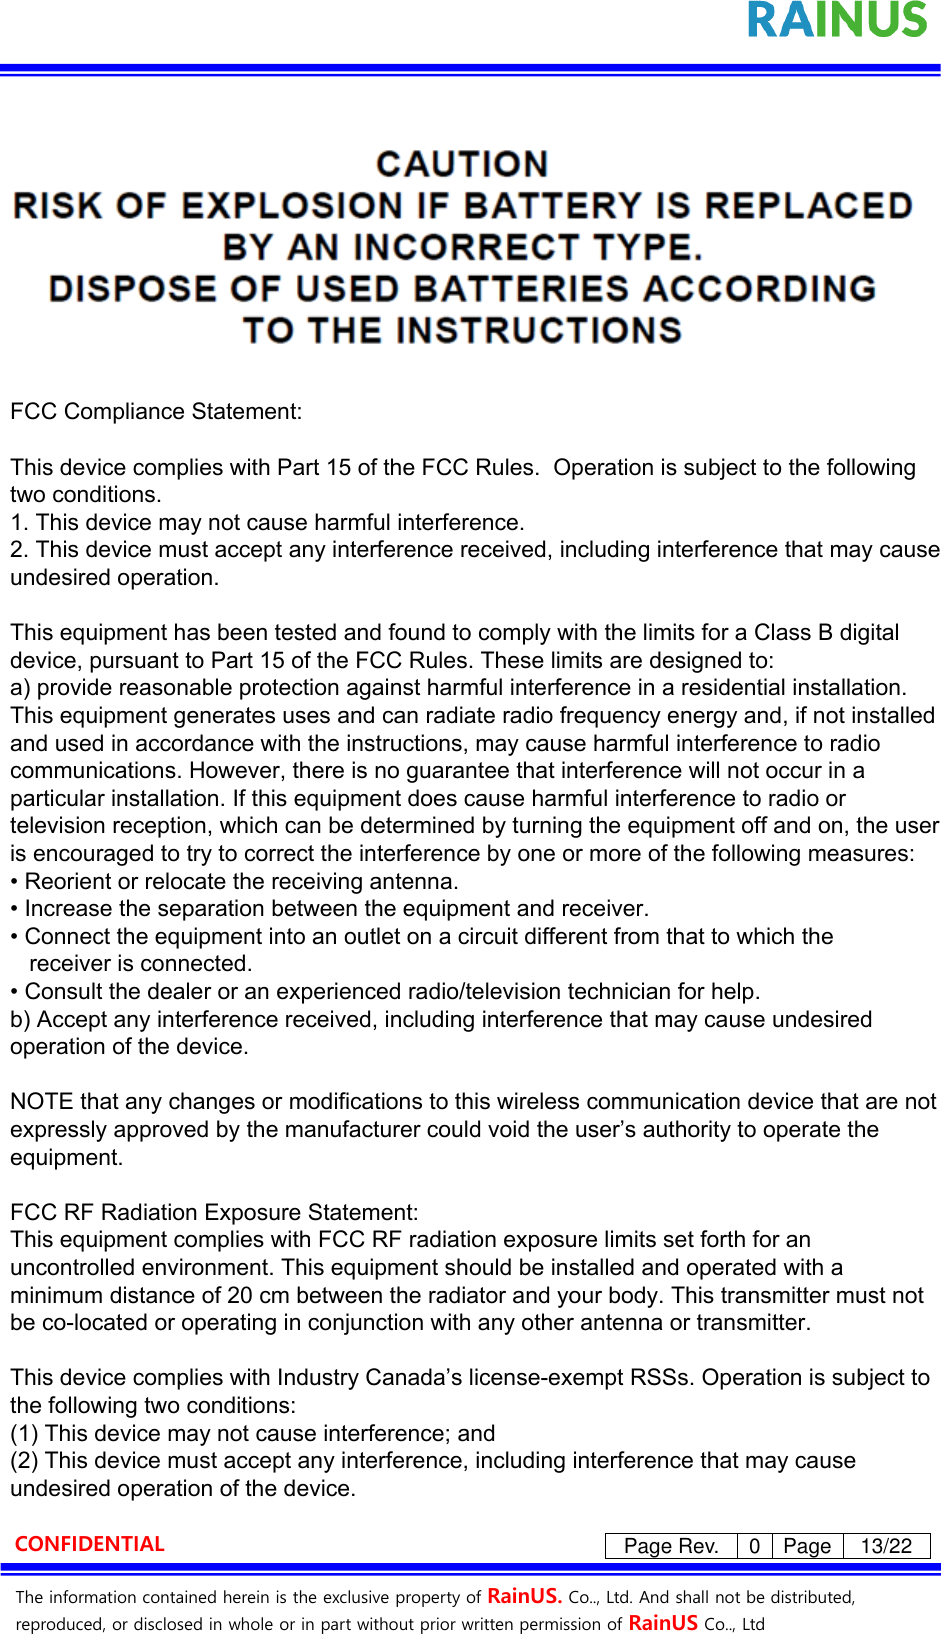 The information contained herein is the exclusive property of RainUS. Co.., Ltd. And shall not be distributed, reproduced, or disclosed in whole or in part without prior written permission of RainUS Co.., Ltd CONFIDENTIAL Page Rev. 0 Page 13/22 FCC Compliance Statement:This device complies with Part 15 of the FCC Rules.  Operation is subject to the following two conditions.1. This device may not cause harmful interference.2. This device must accept any interference received, including interference that may cause undesired operation.This equipment has been tested and found to comply with the limits for a Class B digital device, pursuant to Part 15 of the FCC Rules. These limits are designed to:a) provide reasonable protection against harmful interference in a residential installation. This equipment generates uses and can radiate radio frequency energy and, if not installed and used in accordance with the instructions, may cause harmful interference to radio communications. However, there is no guarantee that interference will not occur in a particular installation. If this equipment does cause harmful interference to radio or television reception, which can be determined by turning the equipment off and on, the user is encouraged to try to correct the interference by one or more of the following measures:• Reorient or relocate the receiving antenna.• Increase the separation between the equipment and receiver.• Connect the equipment into an outlet on a circuit different from that to which the   receiver is connected.• Consult the dealer or an experienced radio/television technician for help.b) Accept any interference received, including interference that may cause undesired operation of the device.NOTE that any changes or modifications to this wireless communication device that are not expressly approved by the manufacturer could void the user’s authority to operate the equipment.FCC RF Radiation Exposure Statement:This equipment complies with FCC RF radiation exposure limits set forth for an uncontrolled environment. This equipment should be installed and operated with a minimum distance of 20 cm between the radiator and your body. This transmitter must not be co-located or operating in conjunction with any other antenna or transmitter.This device complies with Industry Canada’s license-exempt RSSs. Operation is subject to the following two conditions:(1) This device may not cause interference; and (2) This device must accept any interference, including interference that may cause undesired operation of the device.